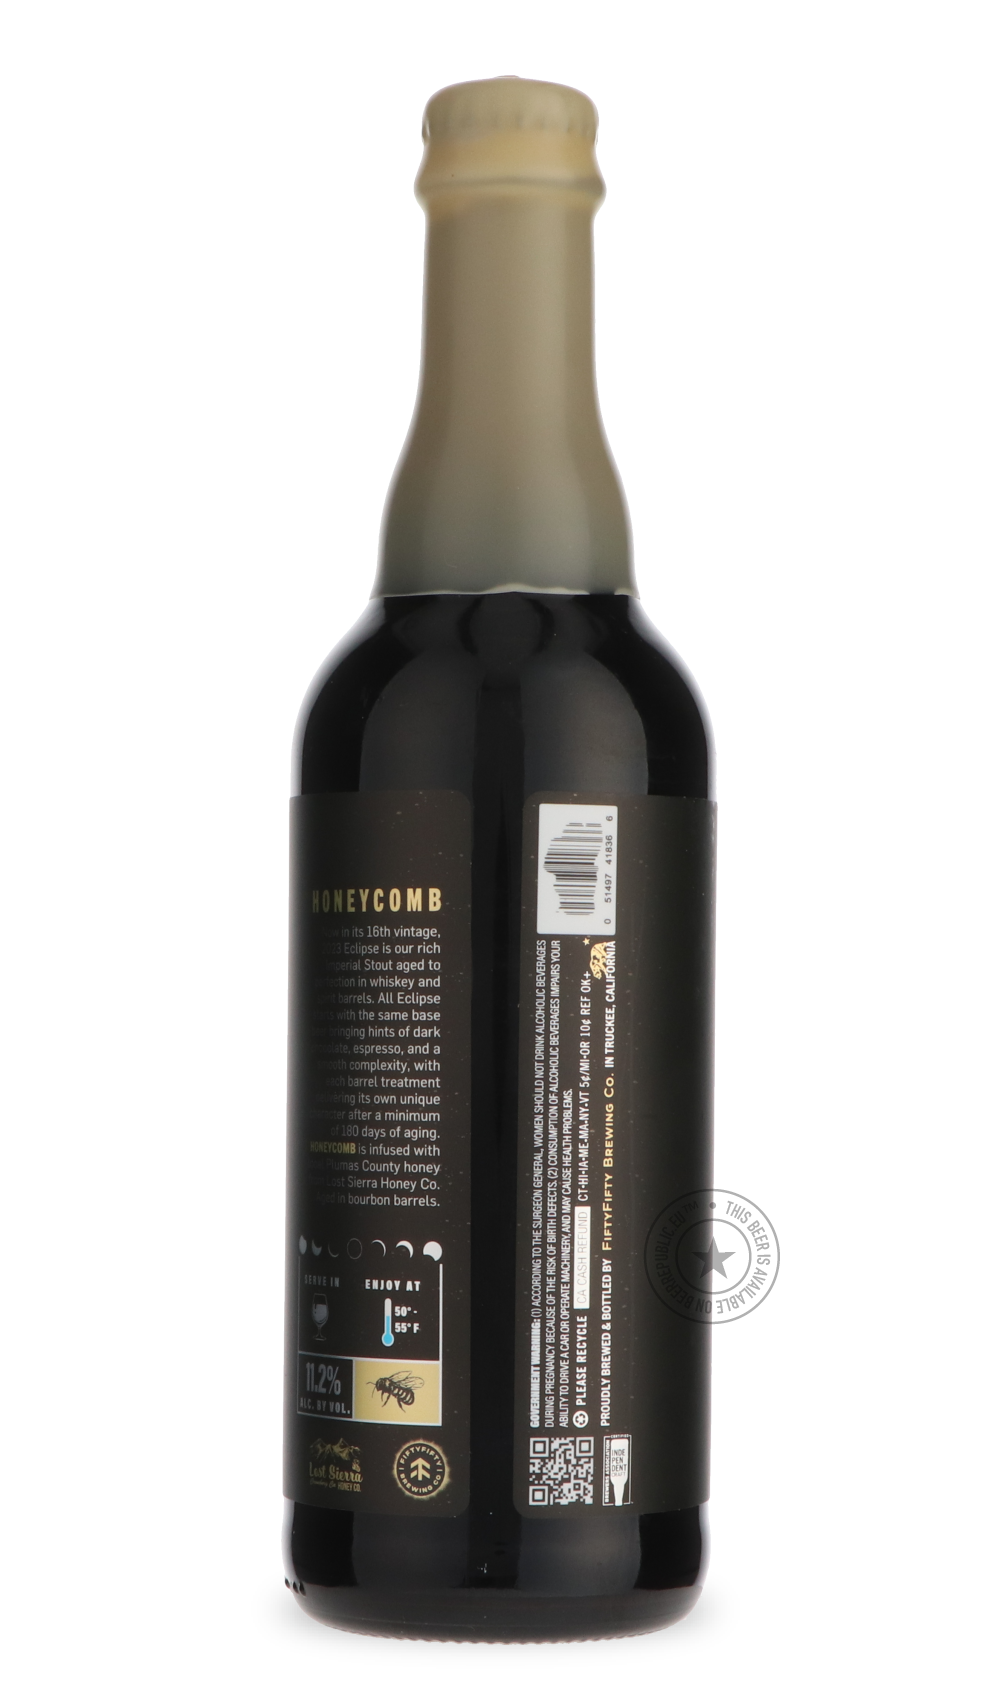 -FiftyFifty- Eclipse - Honycomb (2023)-Stout & Porter- Only @ Beer Republic - The best online beer store for American & Canadian craft beer - Buy beer online from the USA and Canada - Bier online kopen - Amerikaans bier kopen - Craft beer store - Craft beer kopen - Amerikanisch bier kaufen - Bier online kaufen - Acheter biere online - IPA - Stout - Porter - New England IPA - Hazy IPA - Imperial Stout - Barrel Aged - Barrel Aged Imperial Stout - Brown - Dark beer - Blond - Blonde - Pilsner - Lager - Wheat - 